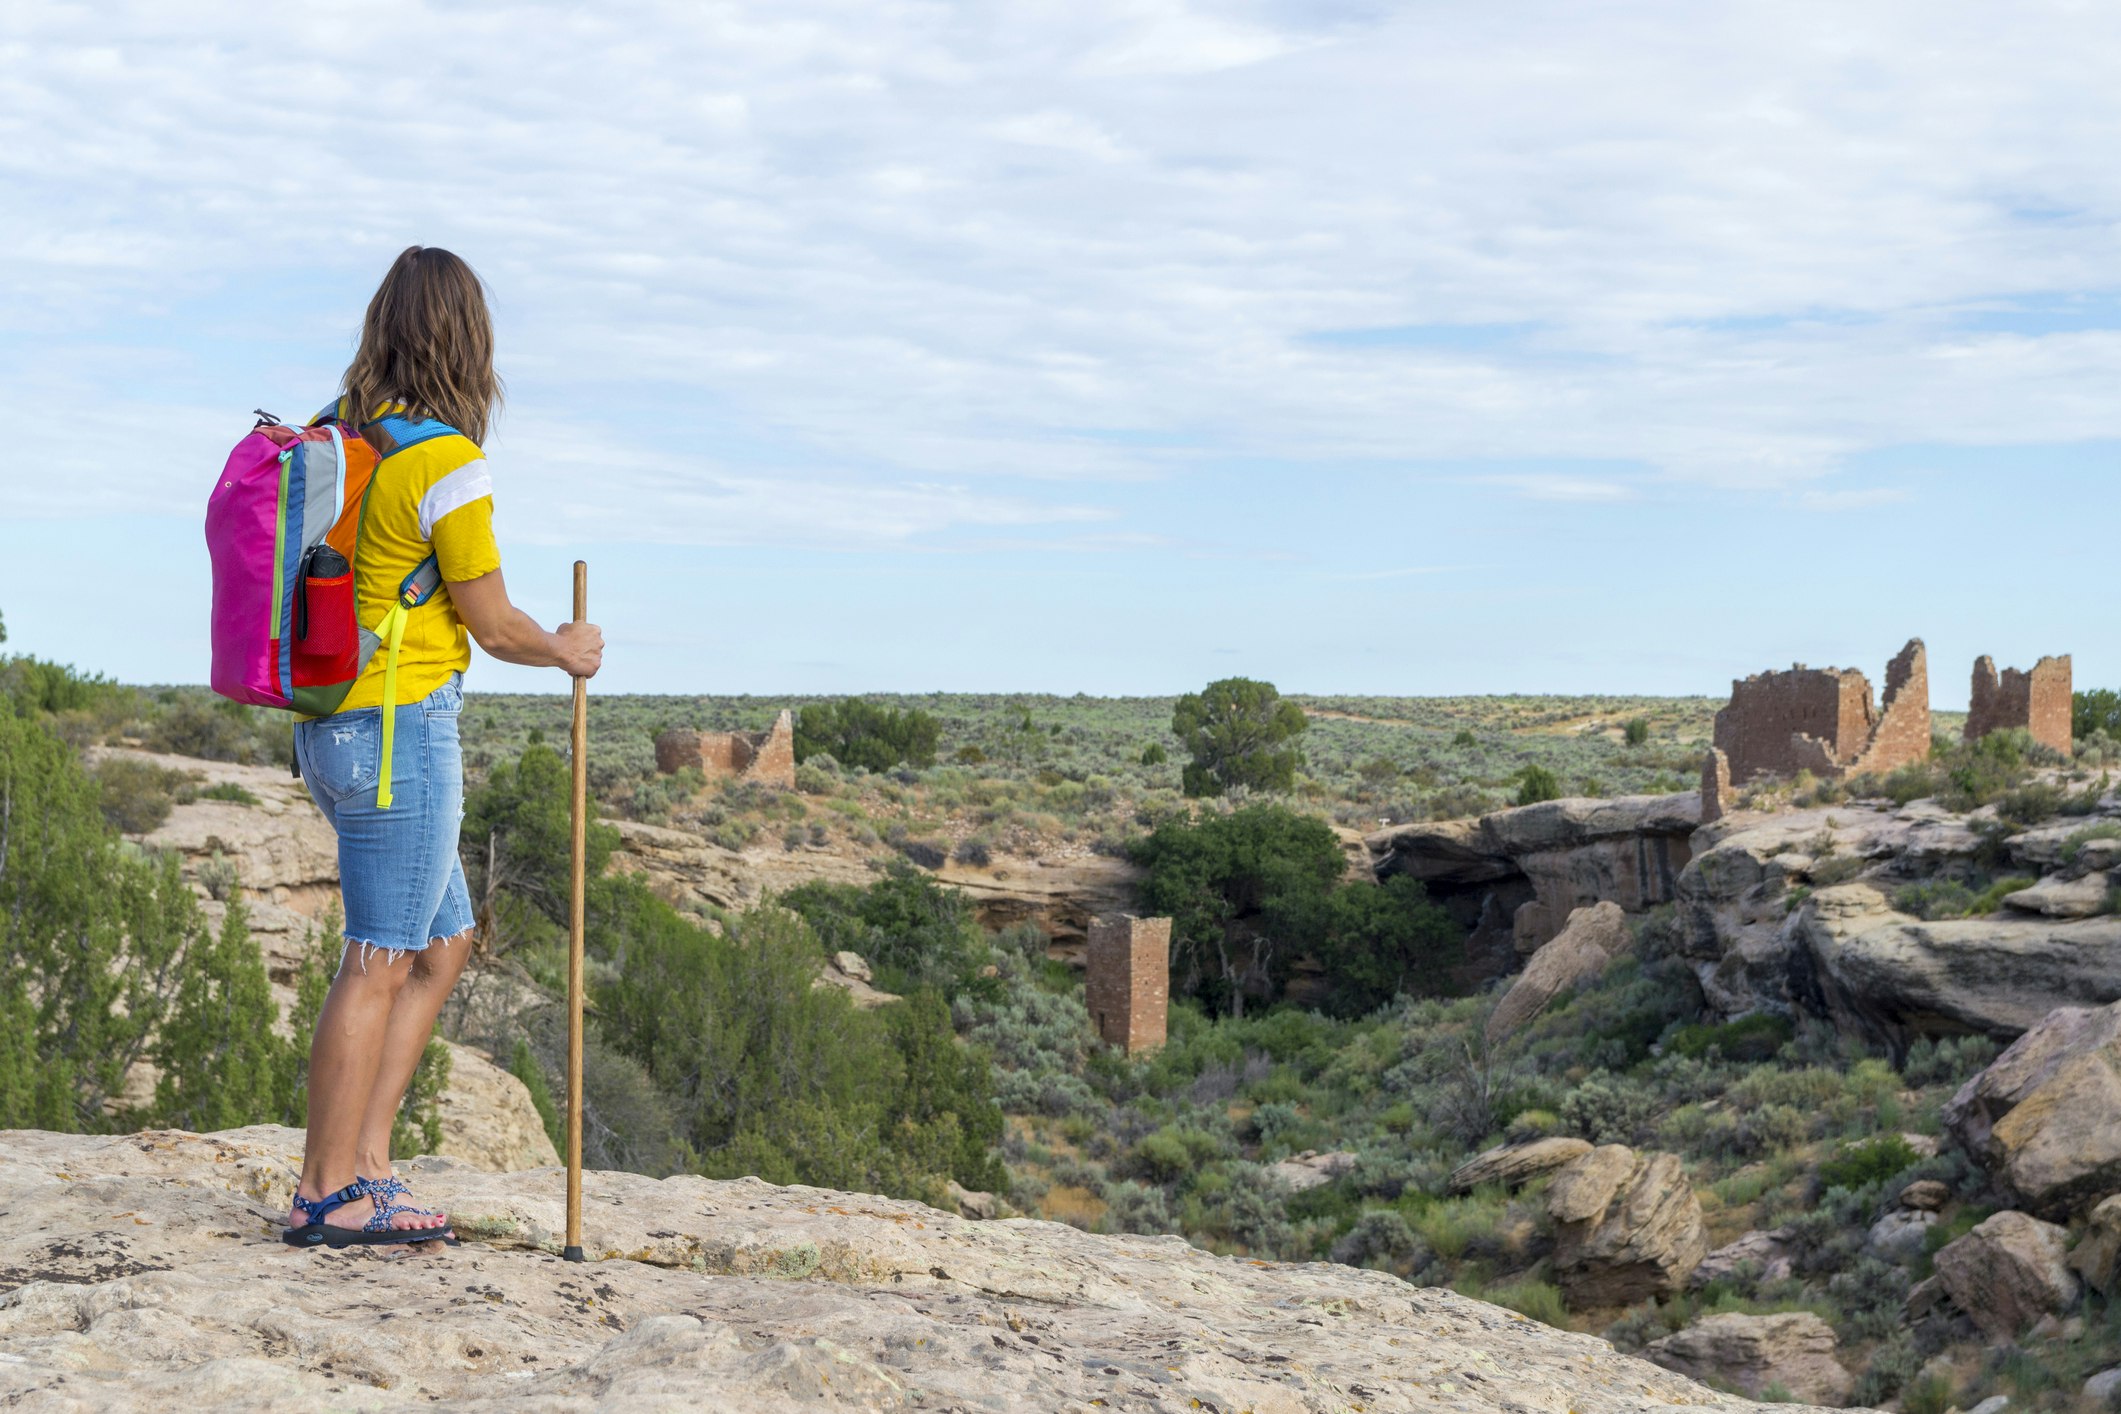 A hiker pauses to view the Native American ruins at Hovenweep National Monument in Colorado